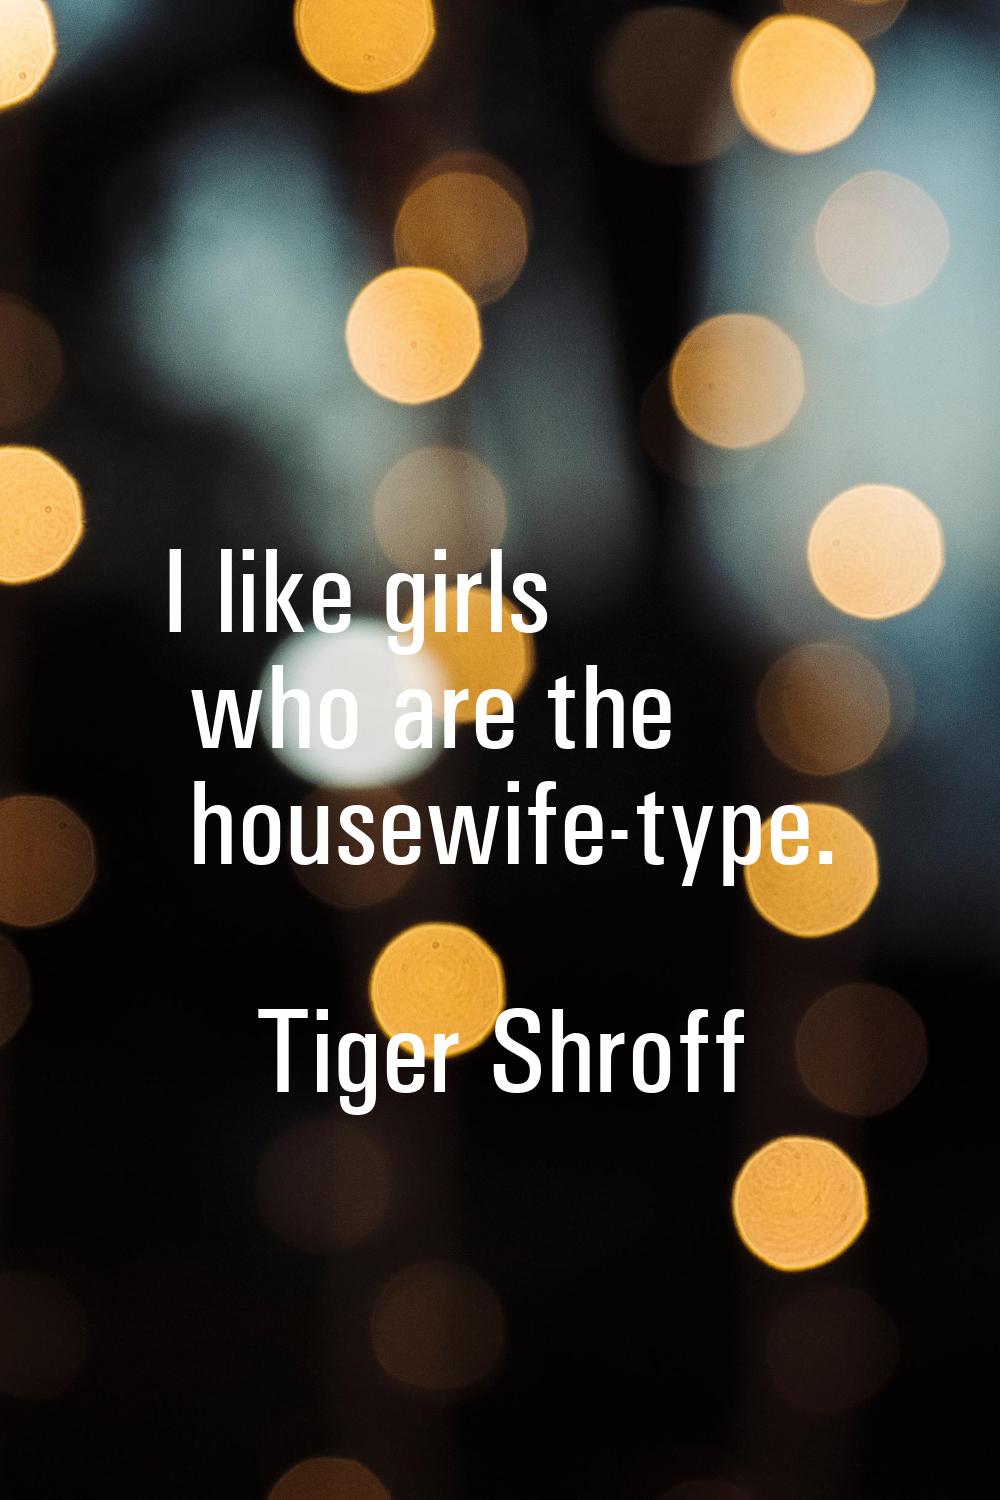 I like girls who are the housewife-type.